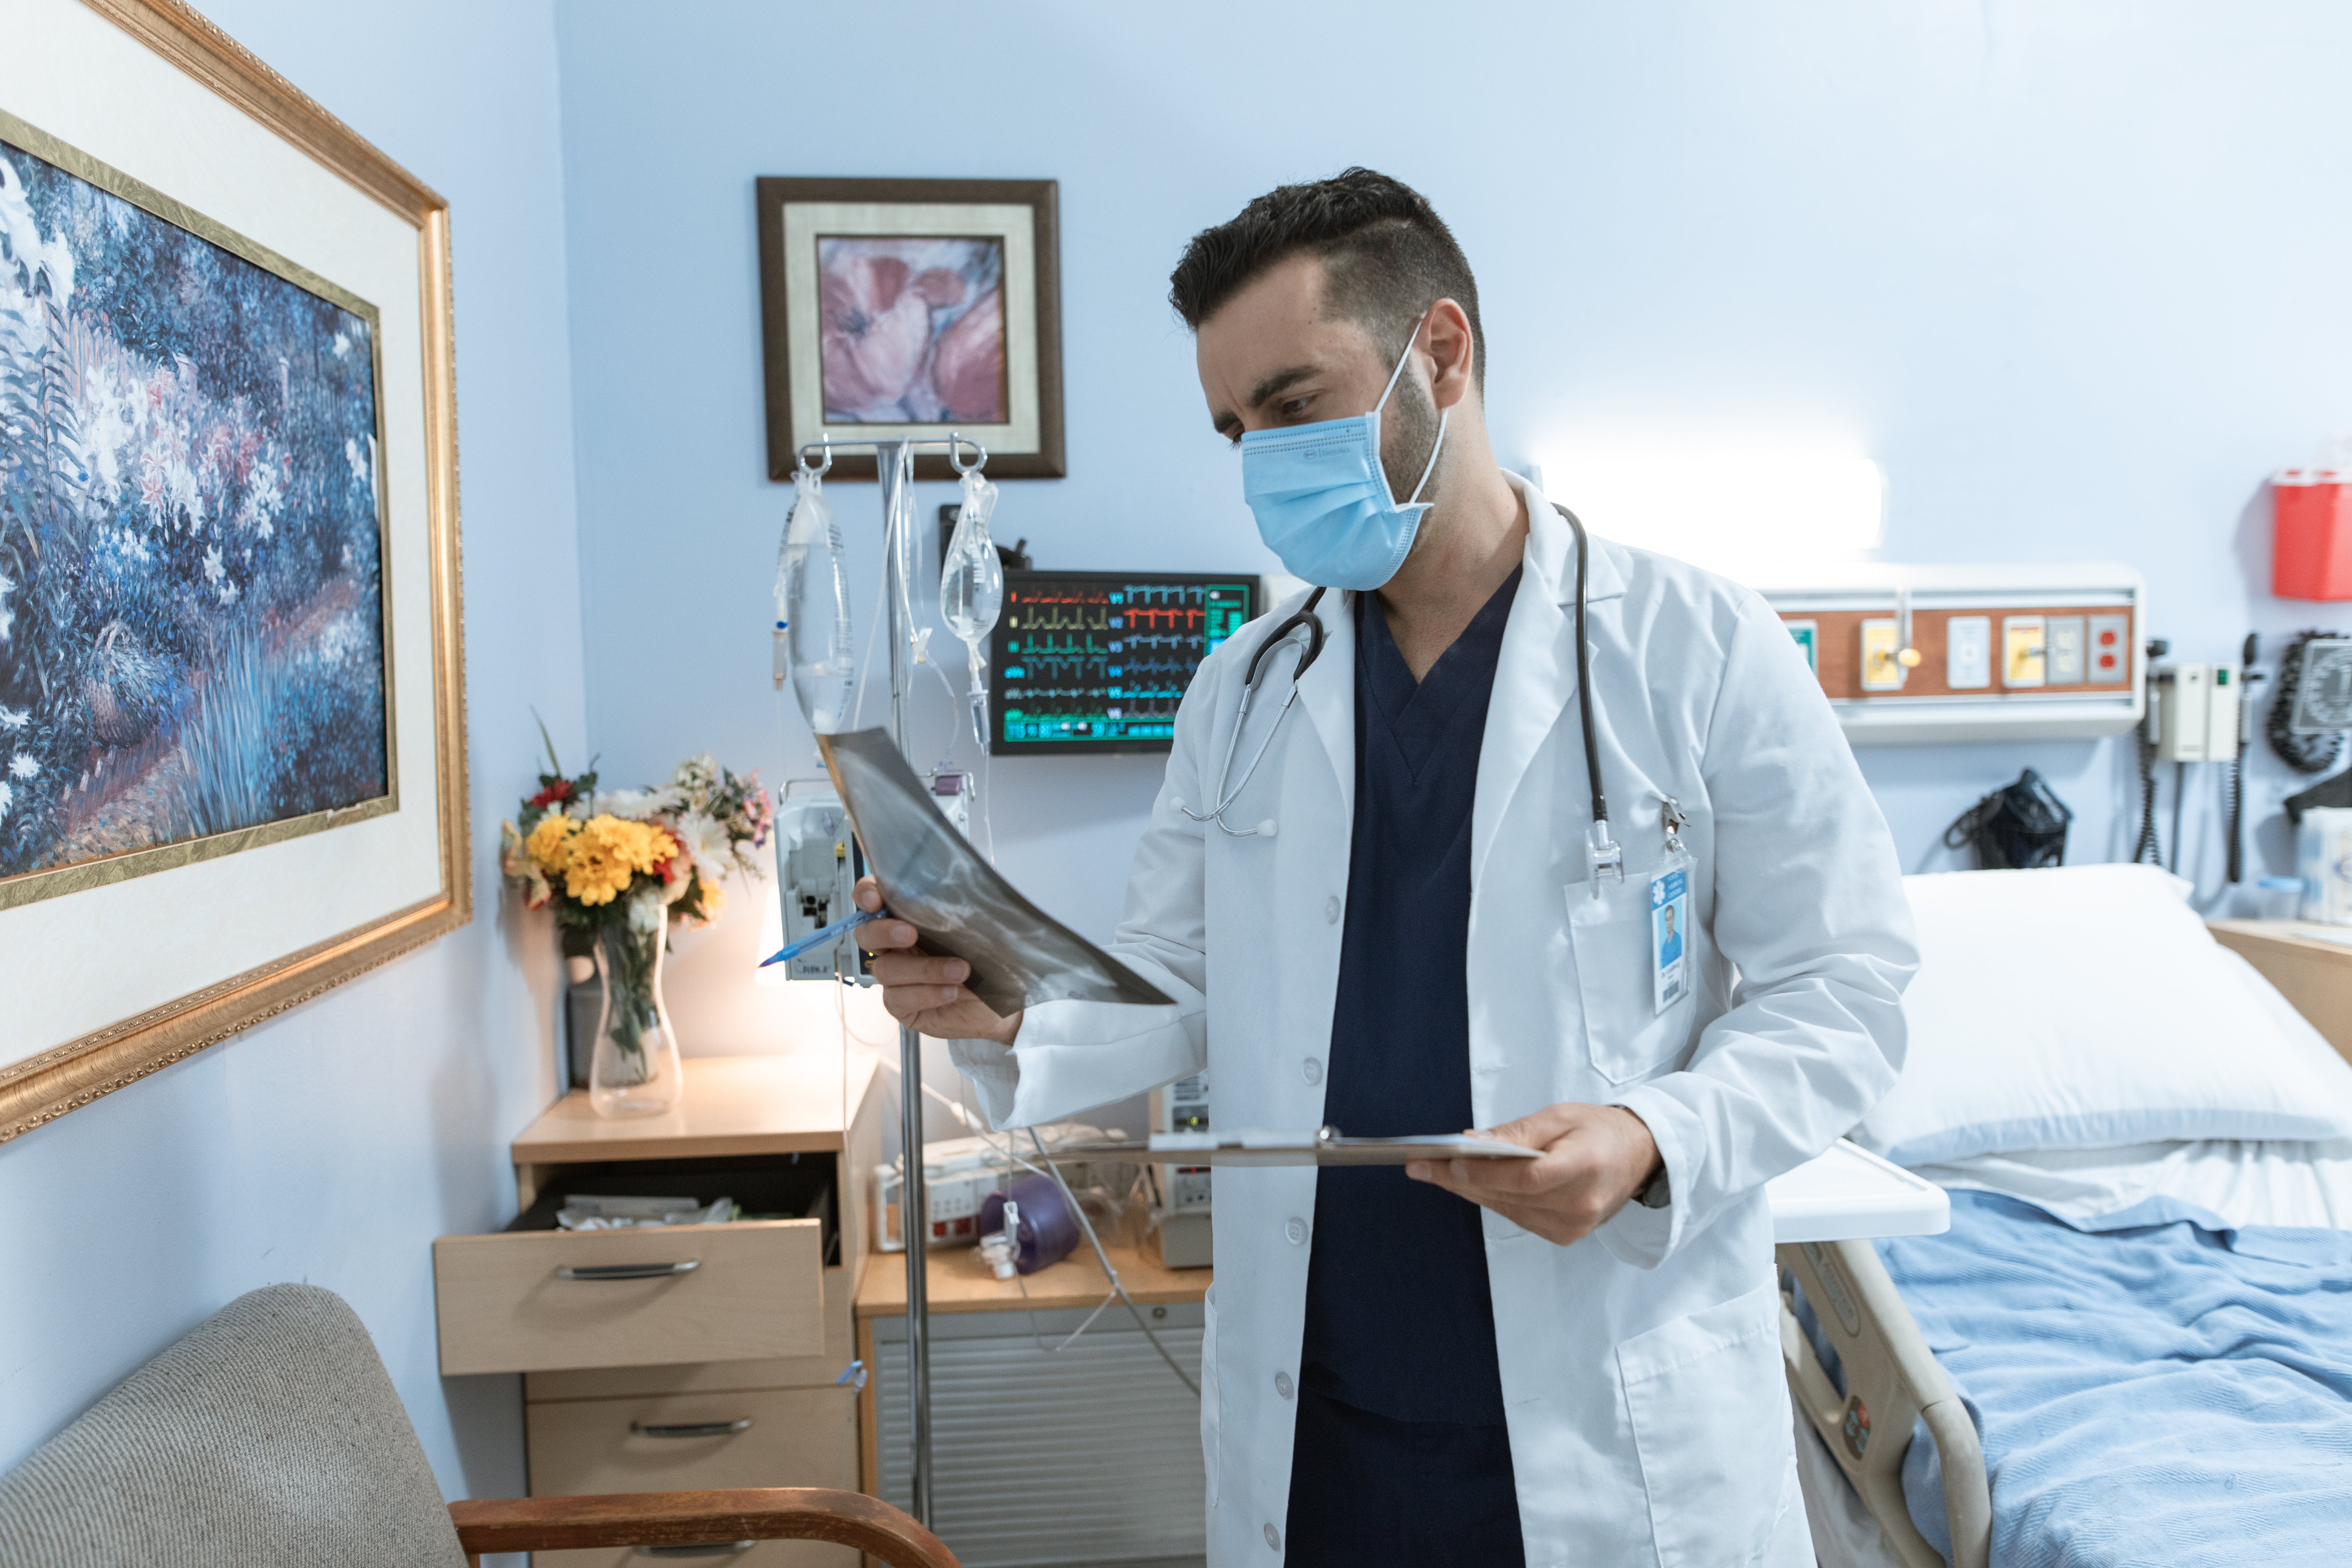 A doctor looking over a patient's hospital chart | Source: Pexels